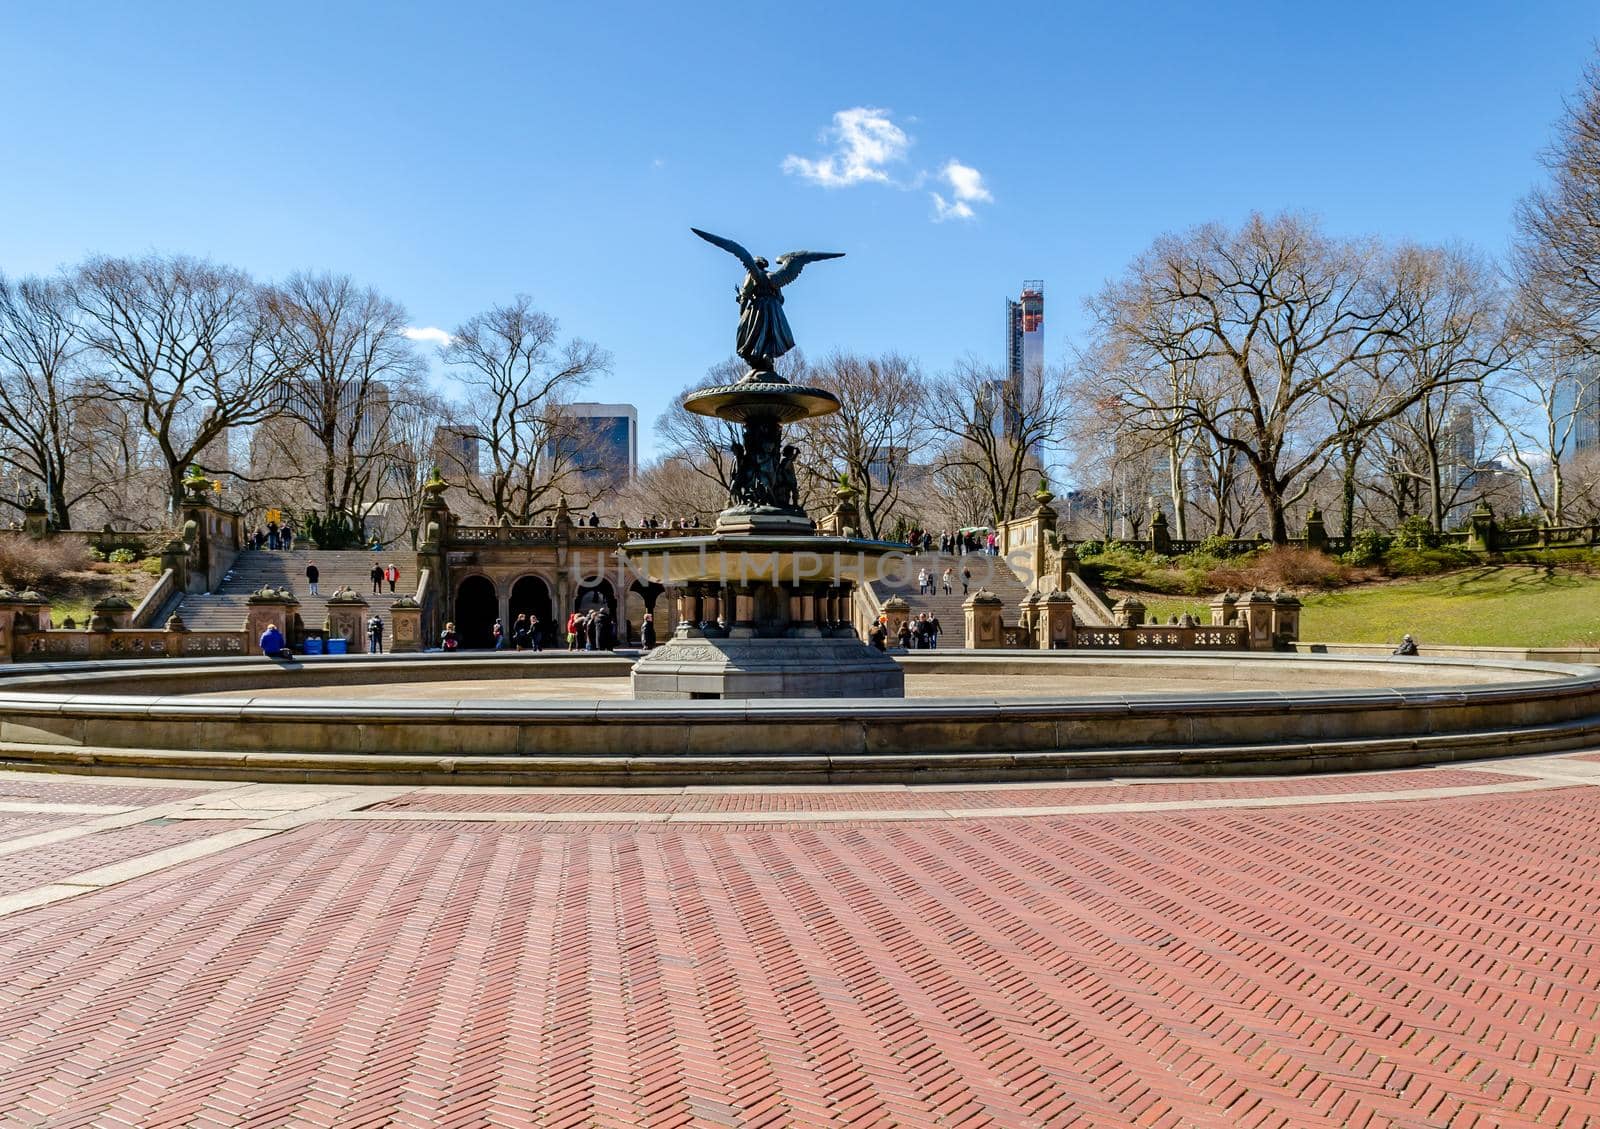 Bethesda Fountain with Angel of the Waters Sculpture, Central Park New York by bildgigant